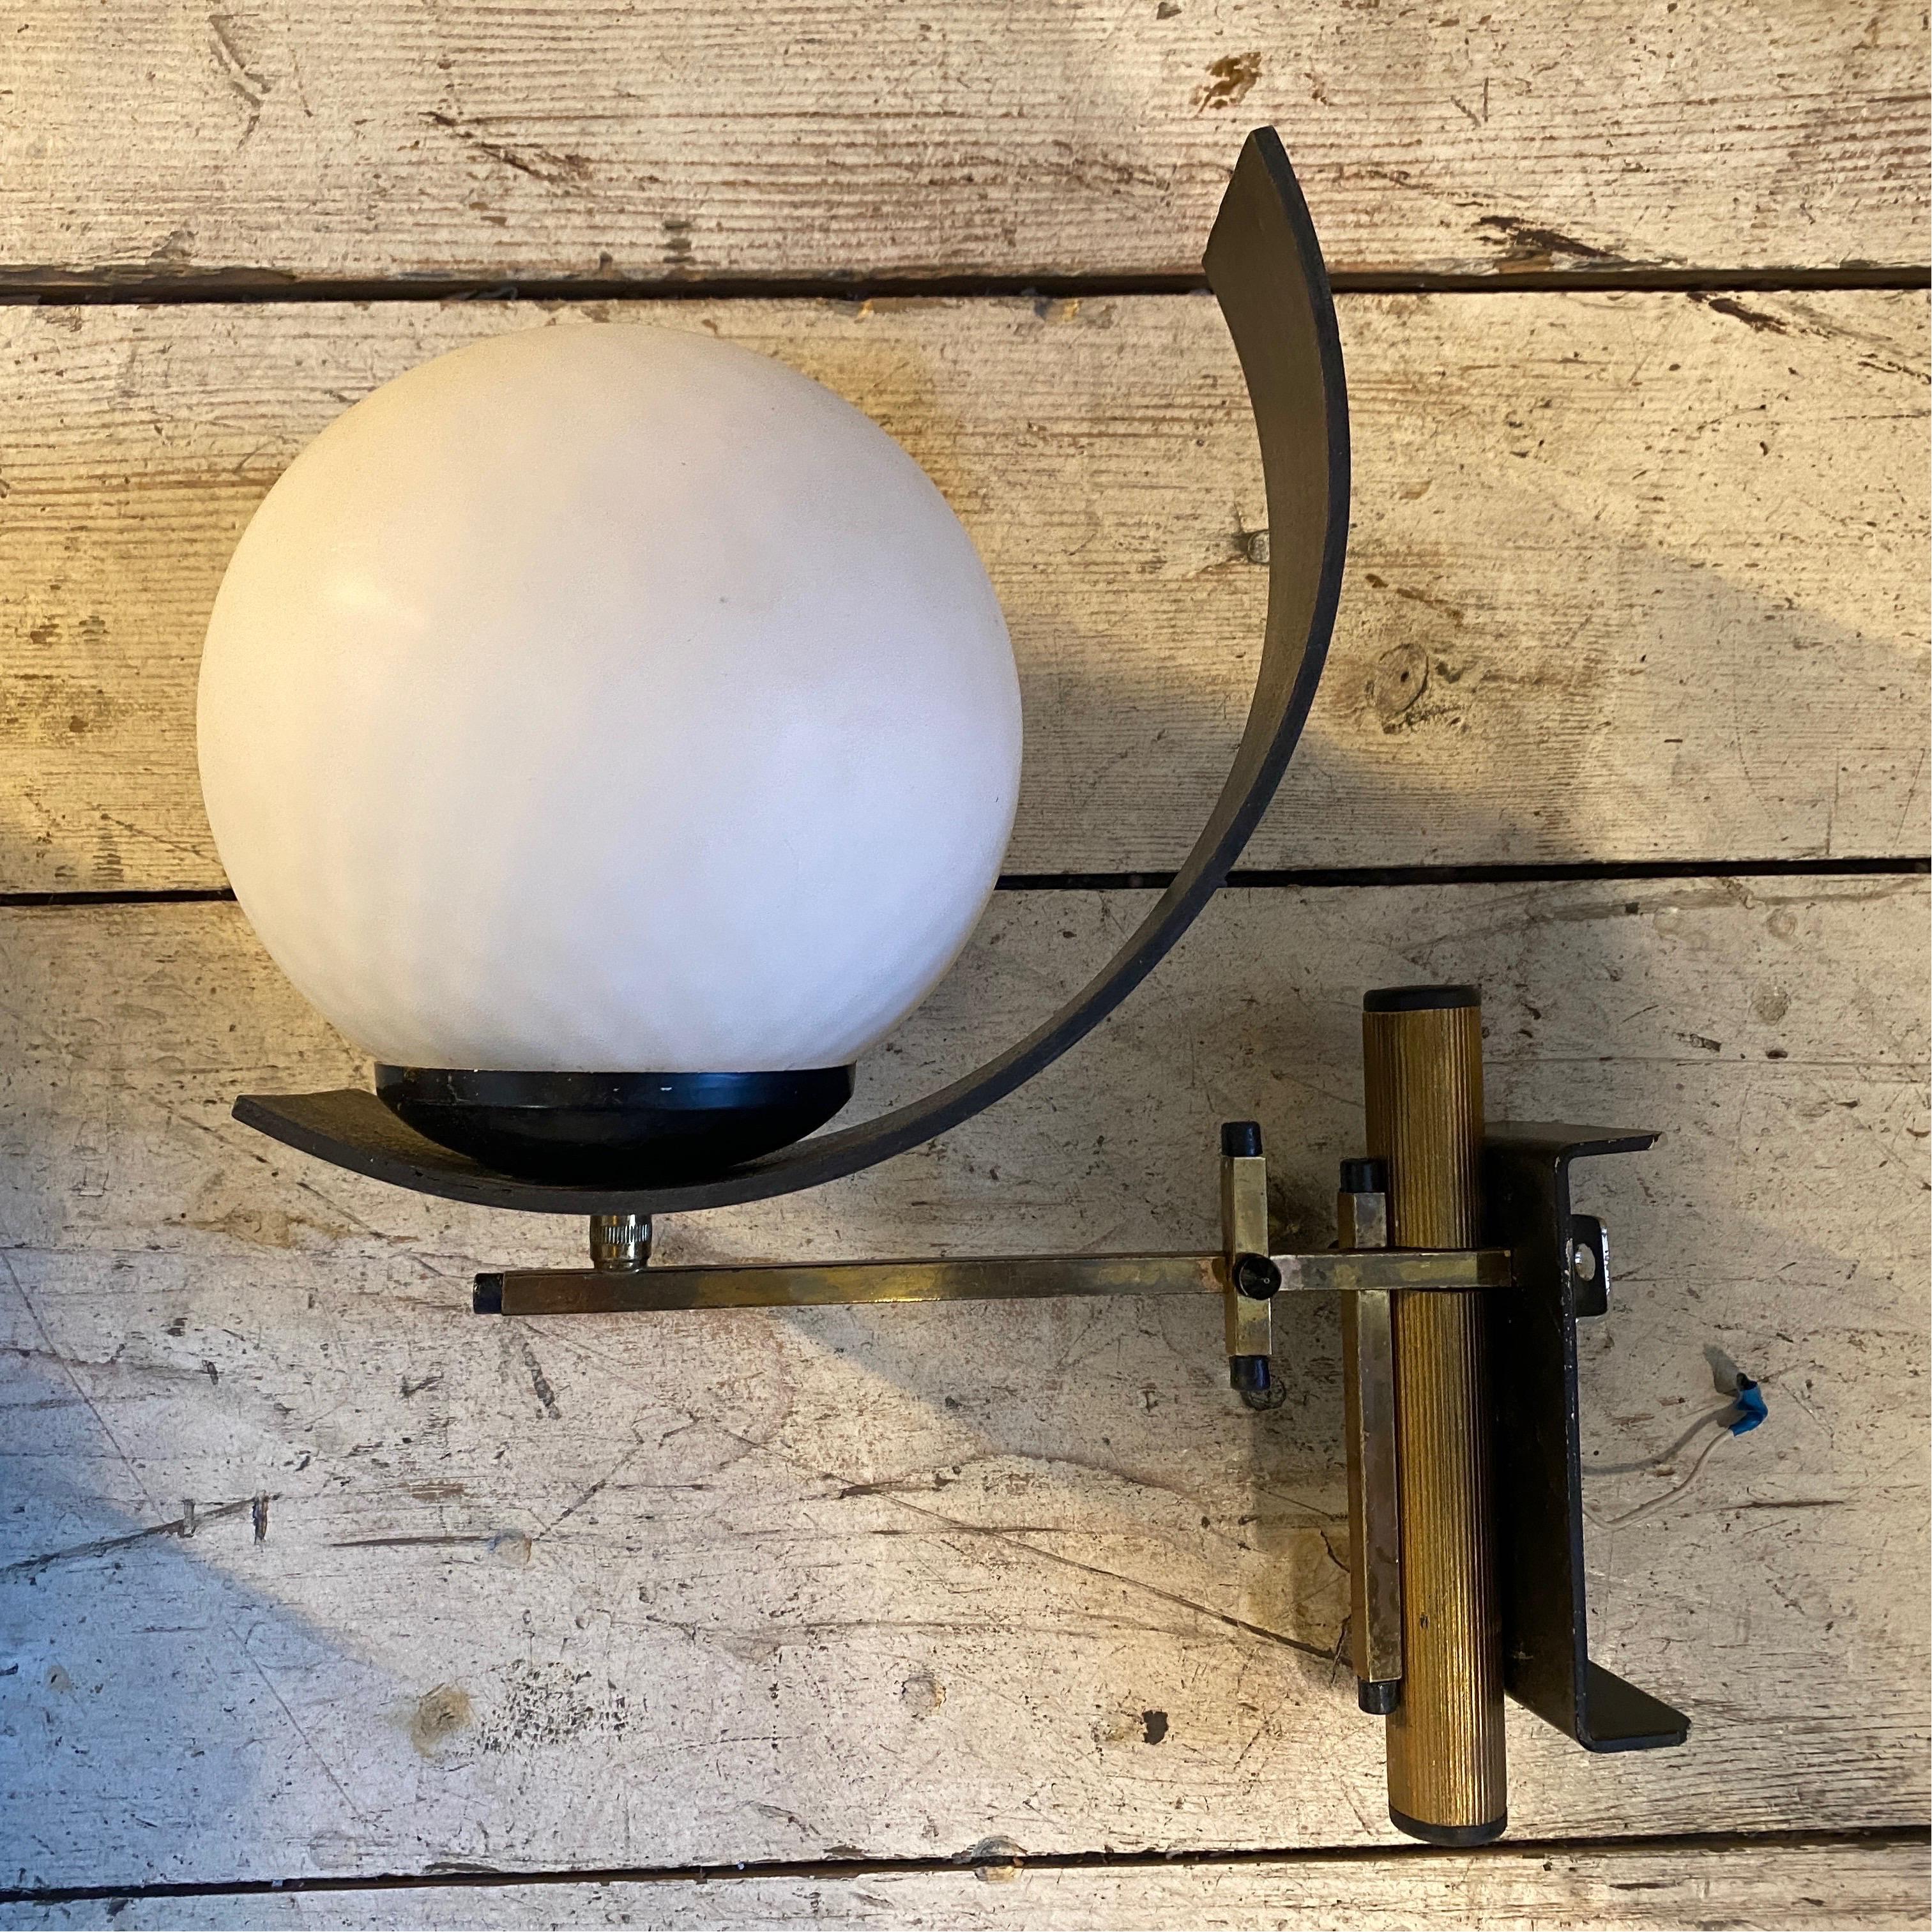 Three rare wall sconces made in Italy in the Sixties, brass and metal are in original patina, the white opaline round glass diffusors gives them a vibrant vintage look, they are sold one by one. The Set of Three Wall Sconces is a remarkable